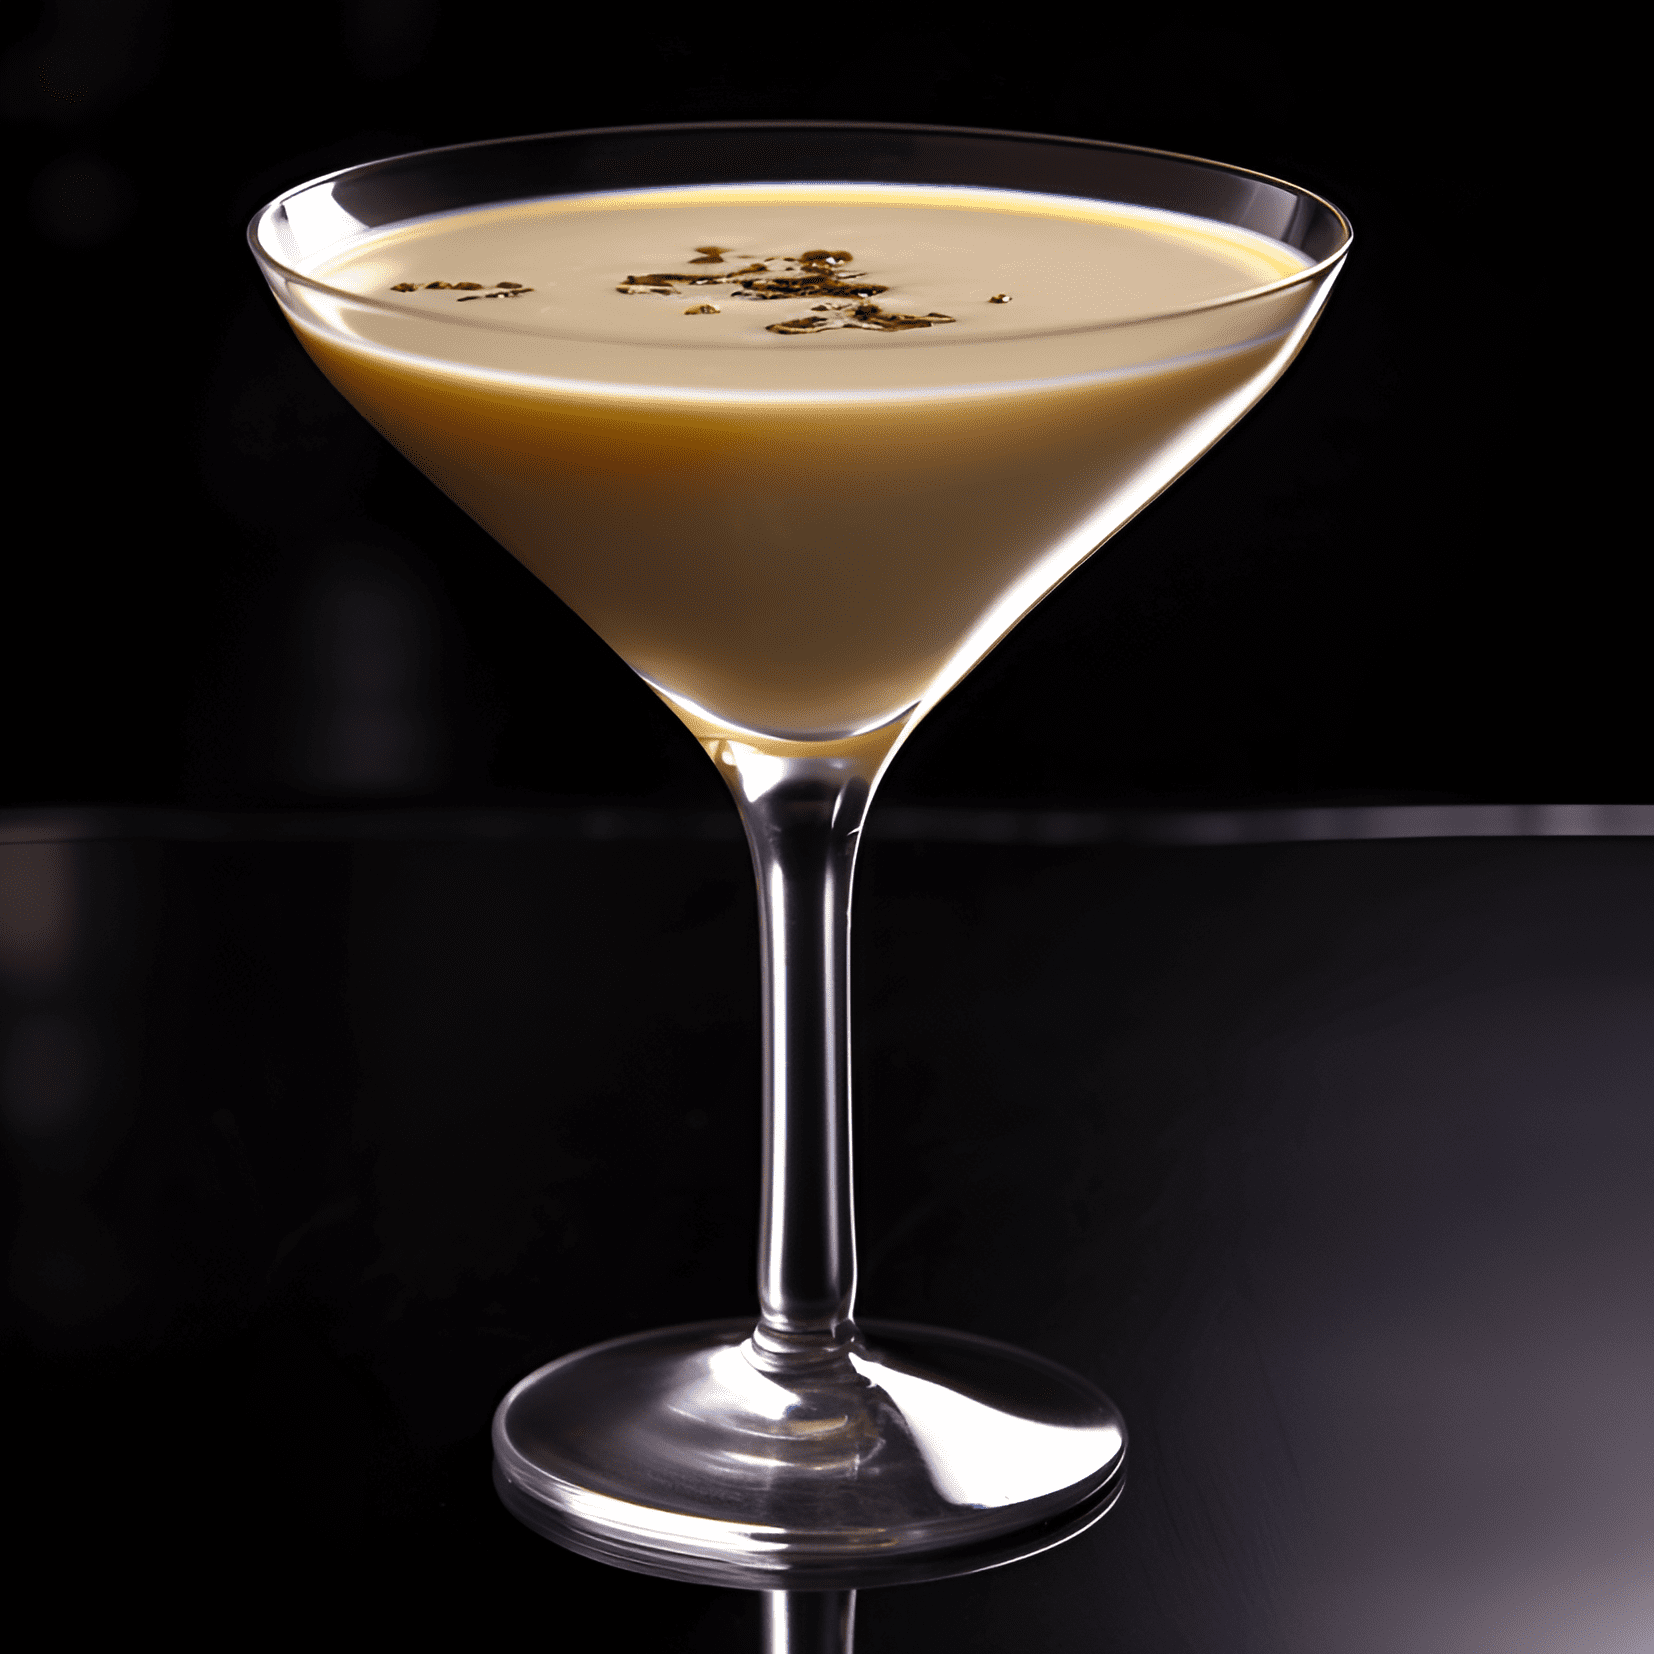 Banshee Cocktail Recipe - The Banshee cocktail is sweet, creamy, and fruity with a hint of banana and chocolate flavors. It has a smooth, velvety texture and a light, refreshing finish.